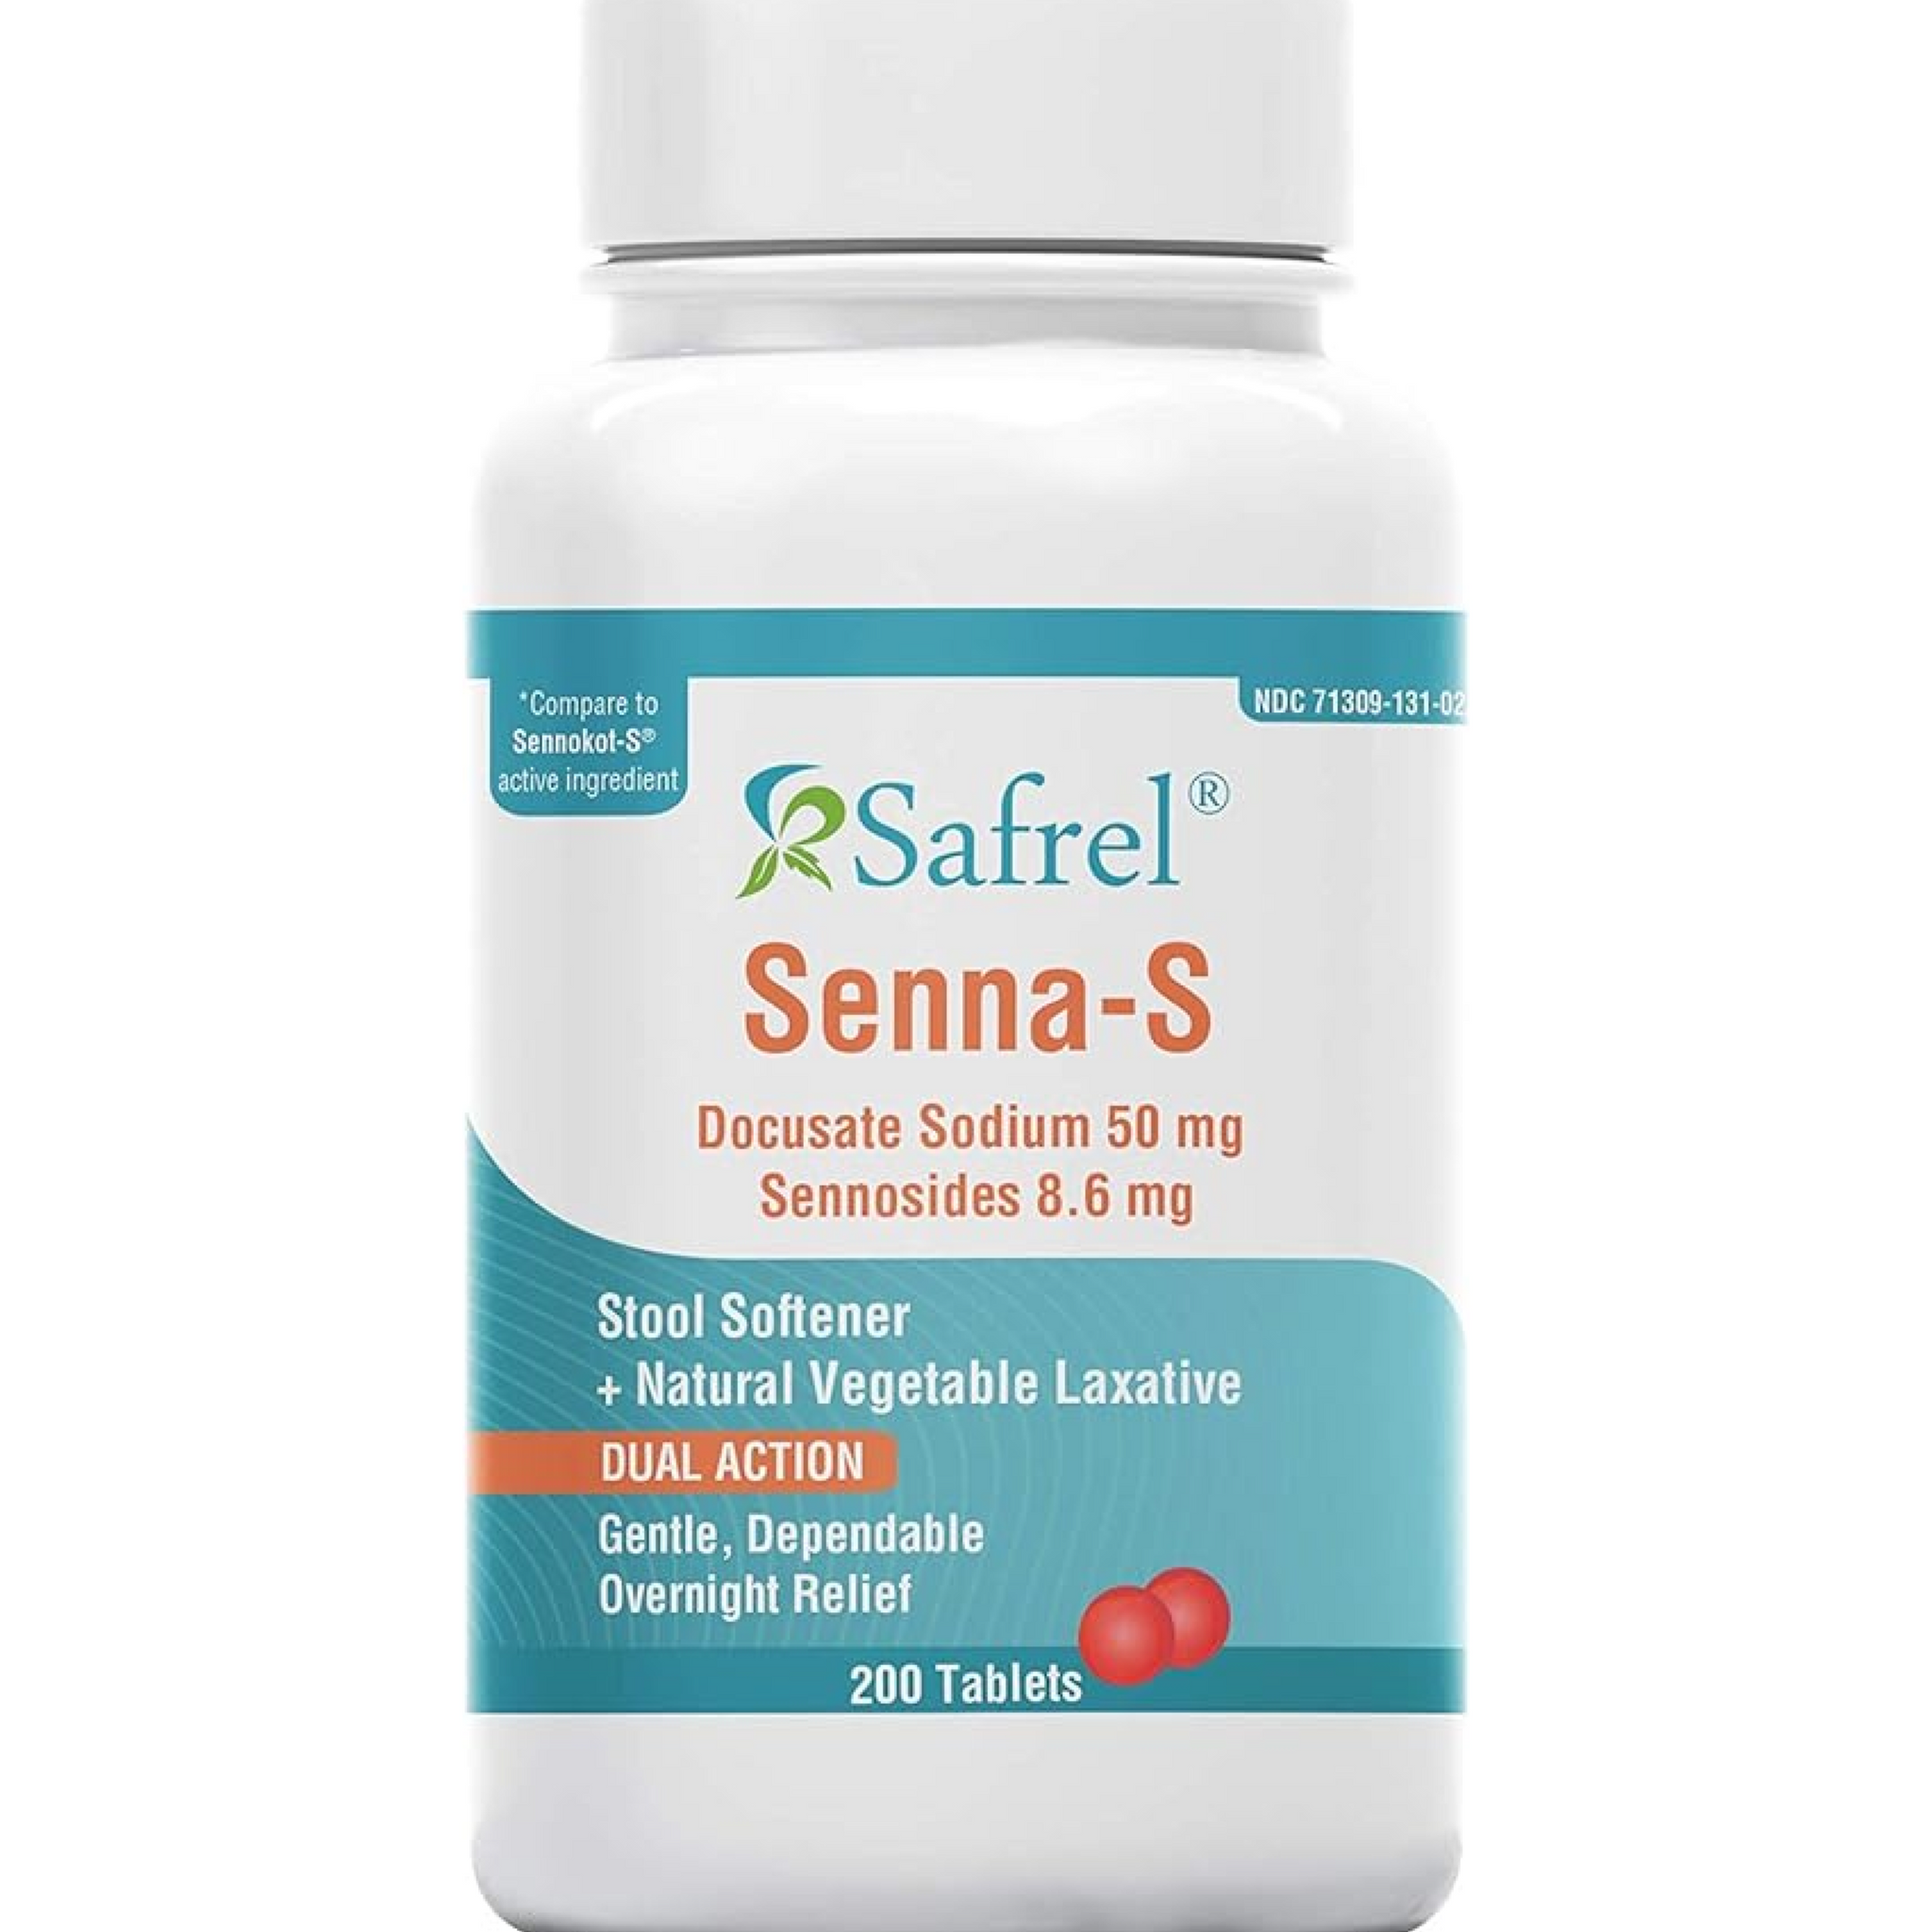 Safrel Senna-S (200 Tablets) Dual Action Natural Vegetable Laxative Stool Softener | Relieves Constipation, Gas, Bloating | Gentle on Stomach | Safe Digestive Support (Generic Senokot-S) | Value Pack